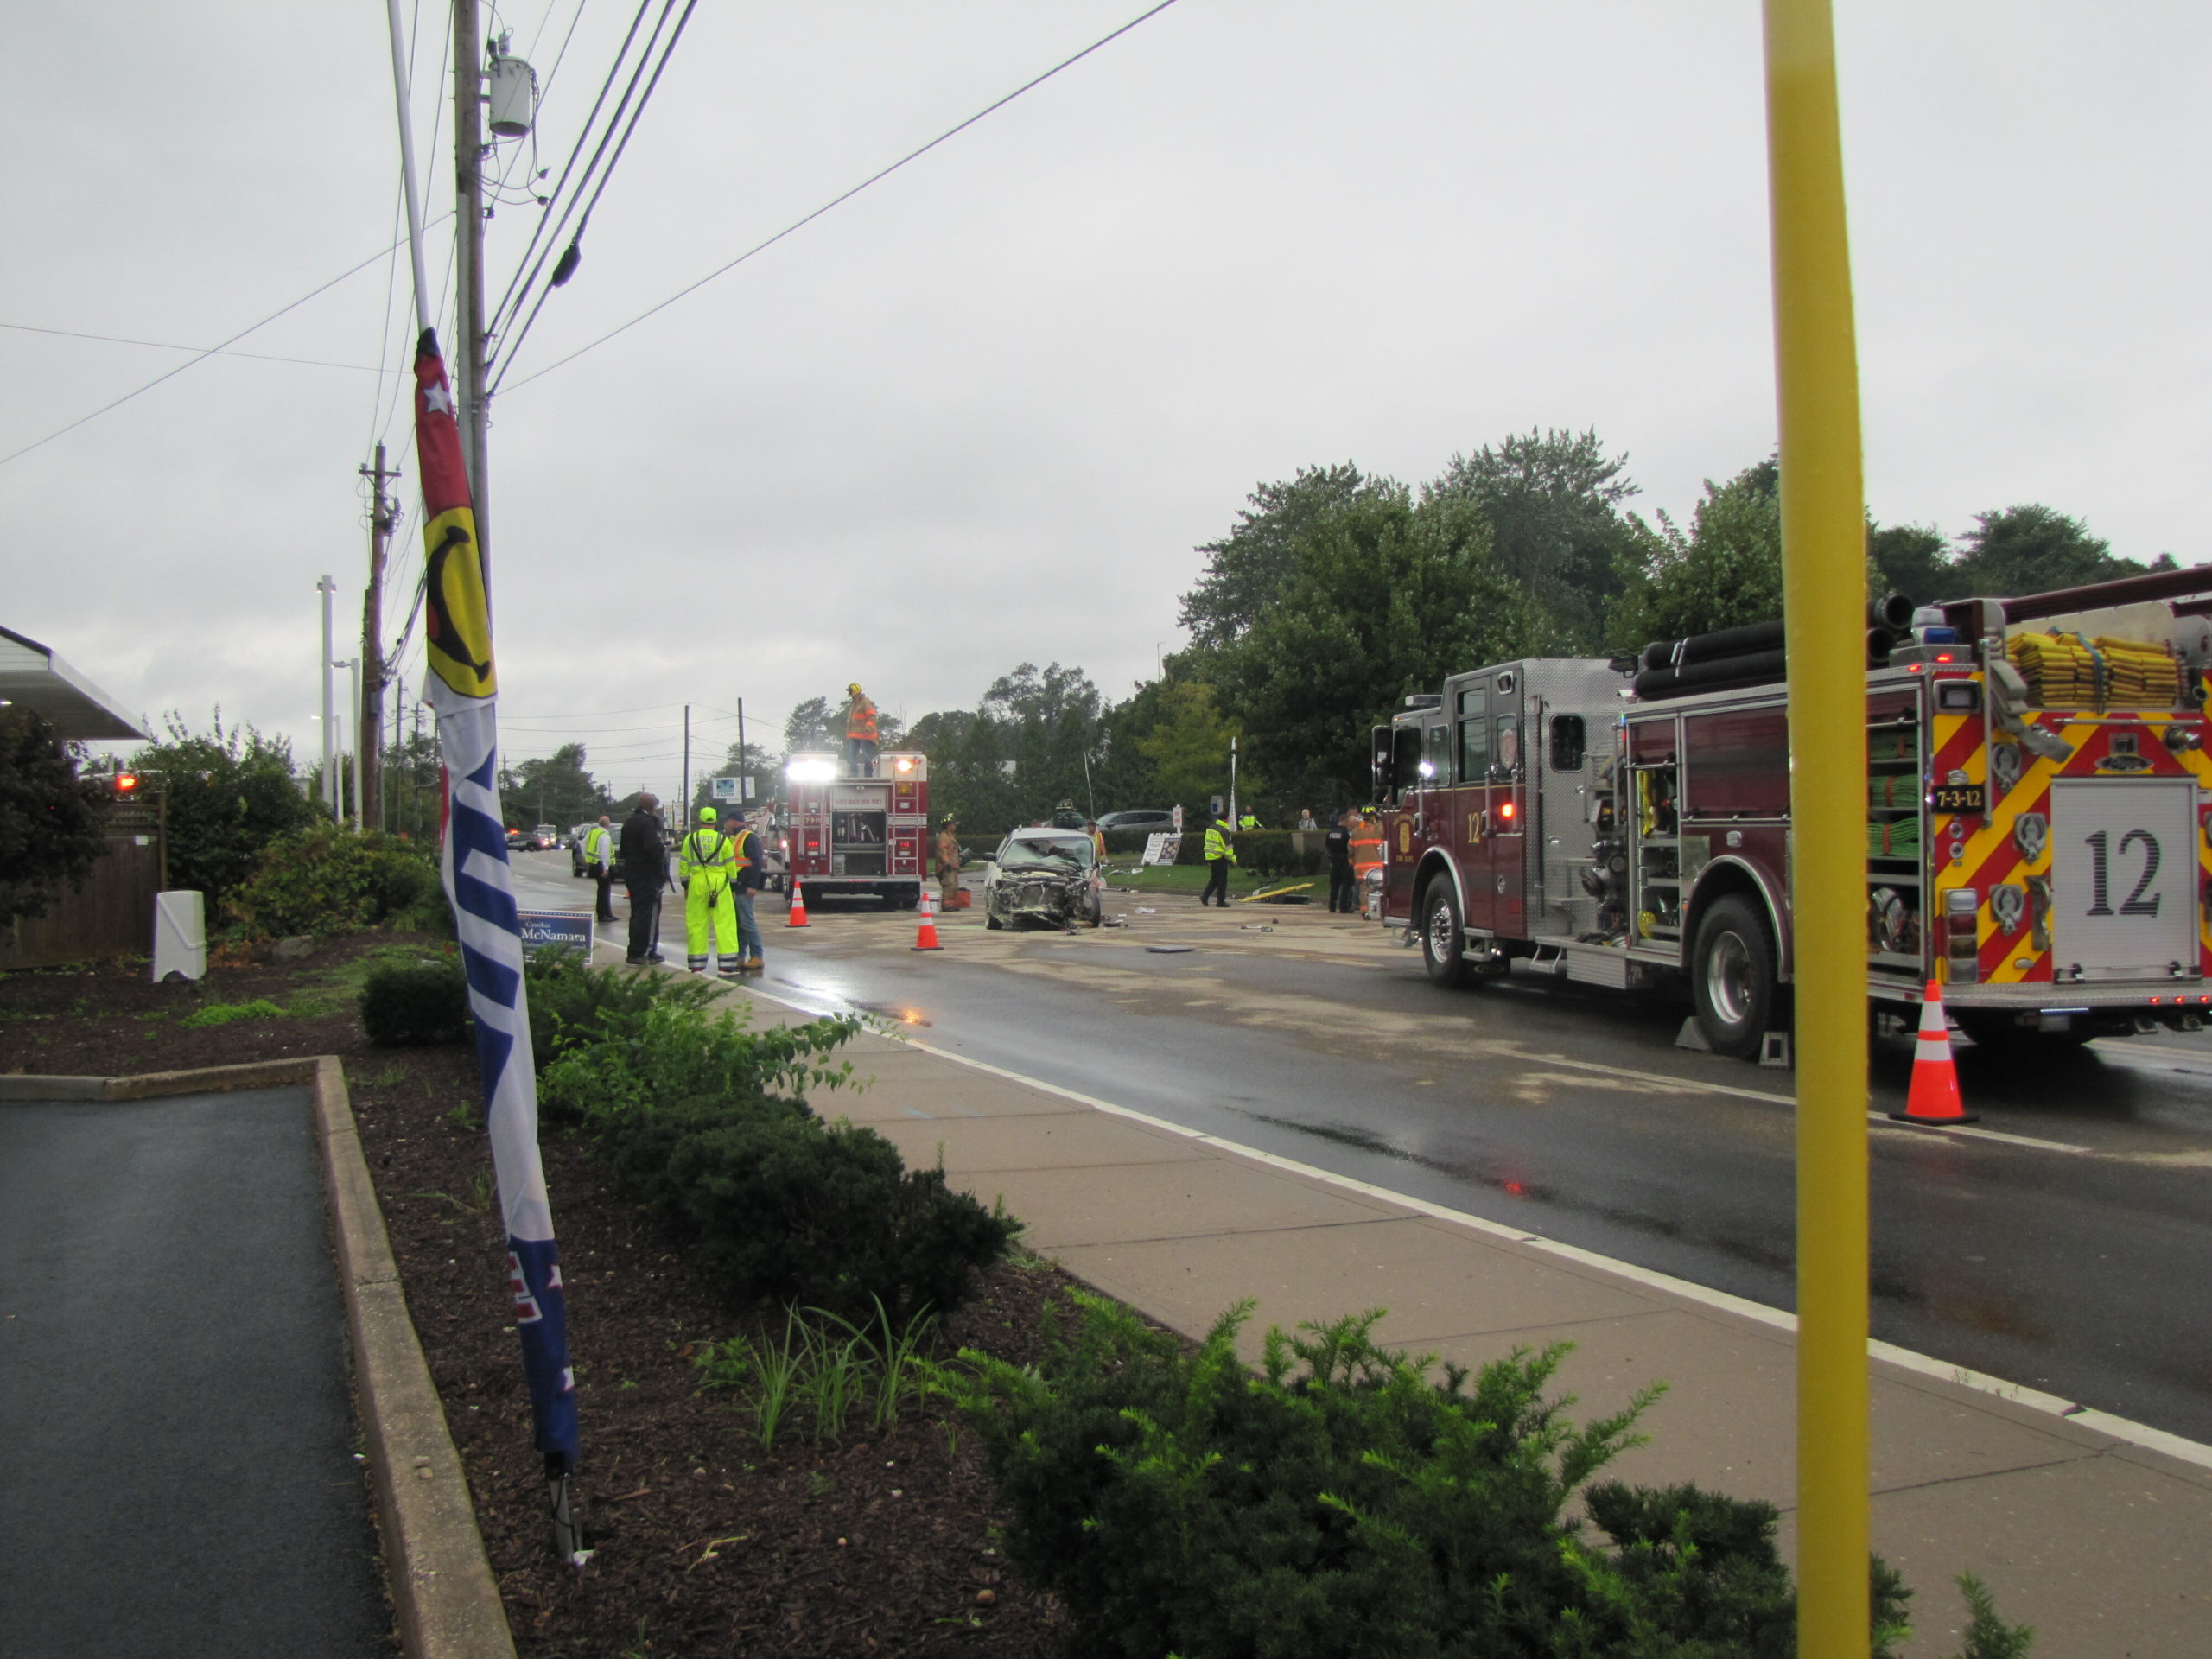 Emergency responders arrive at the scene of the crash.